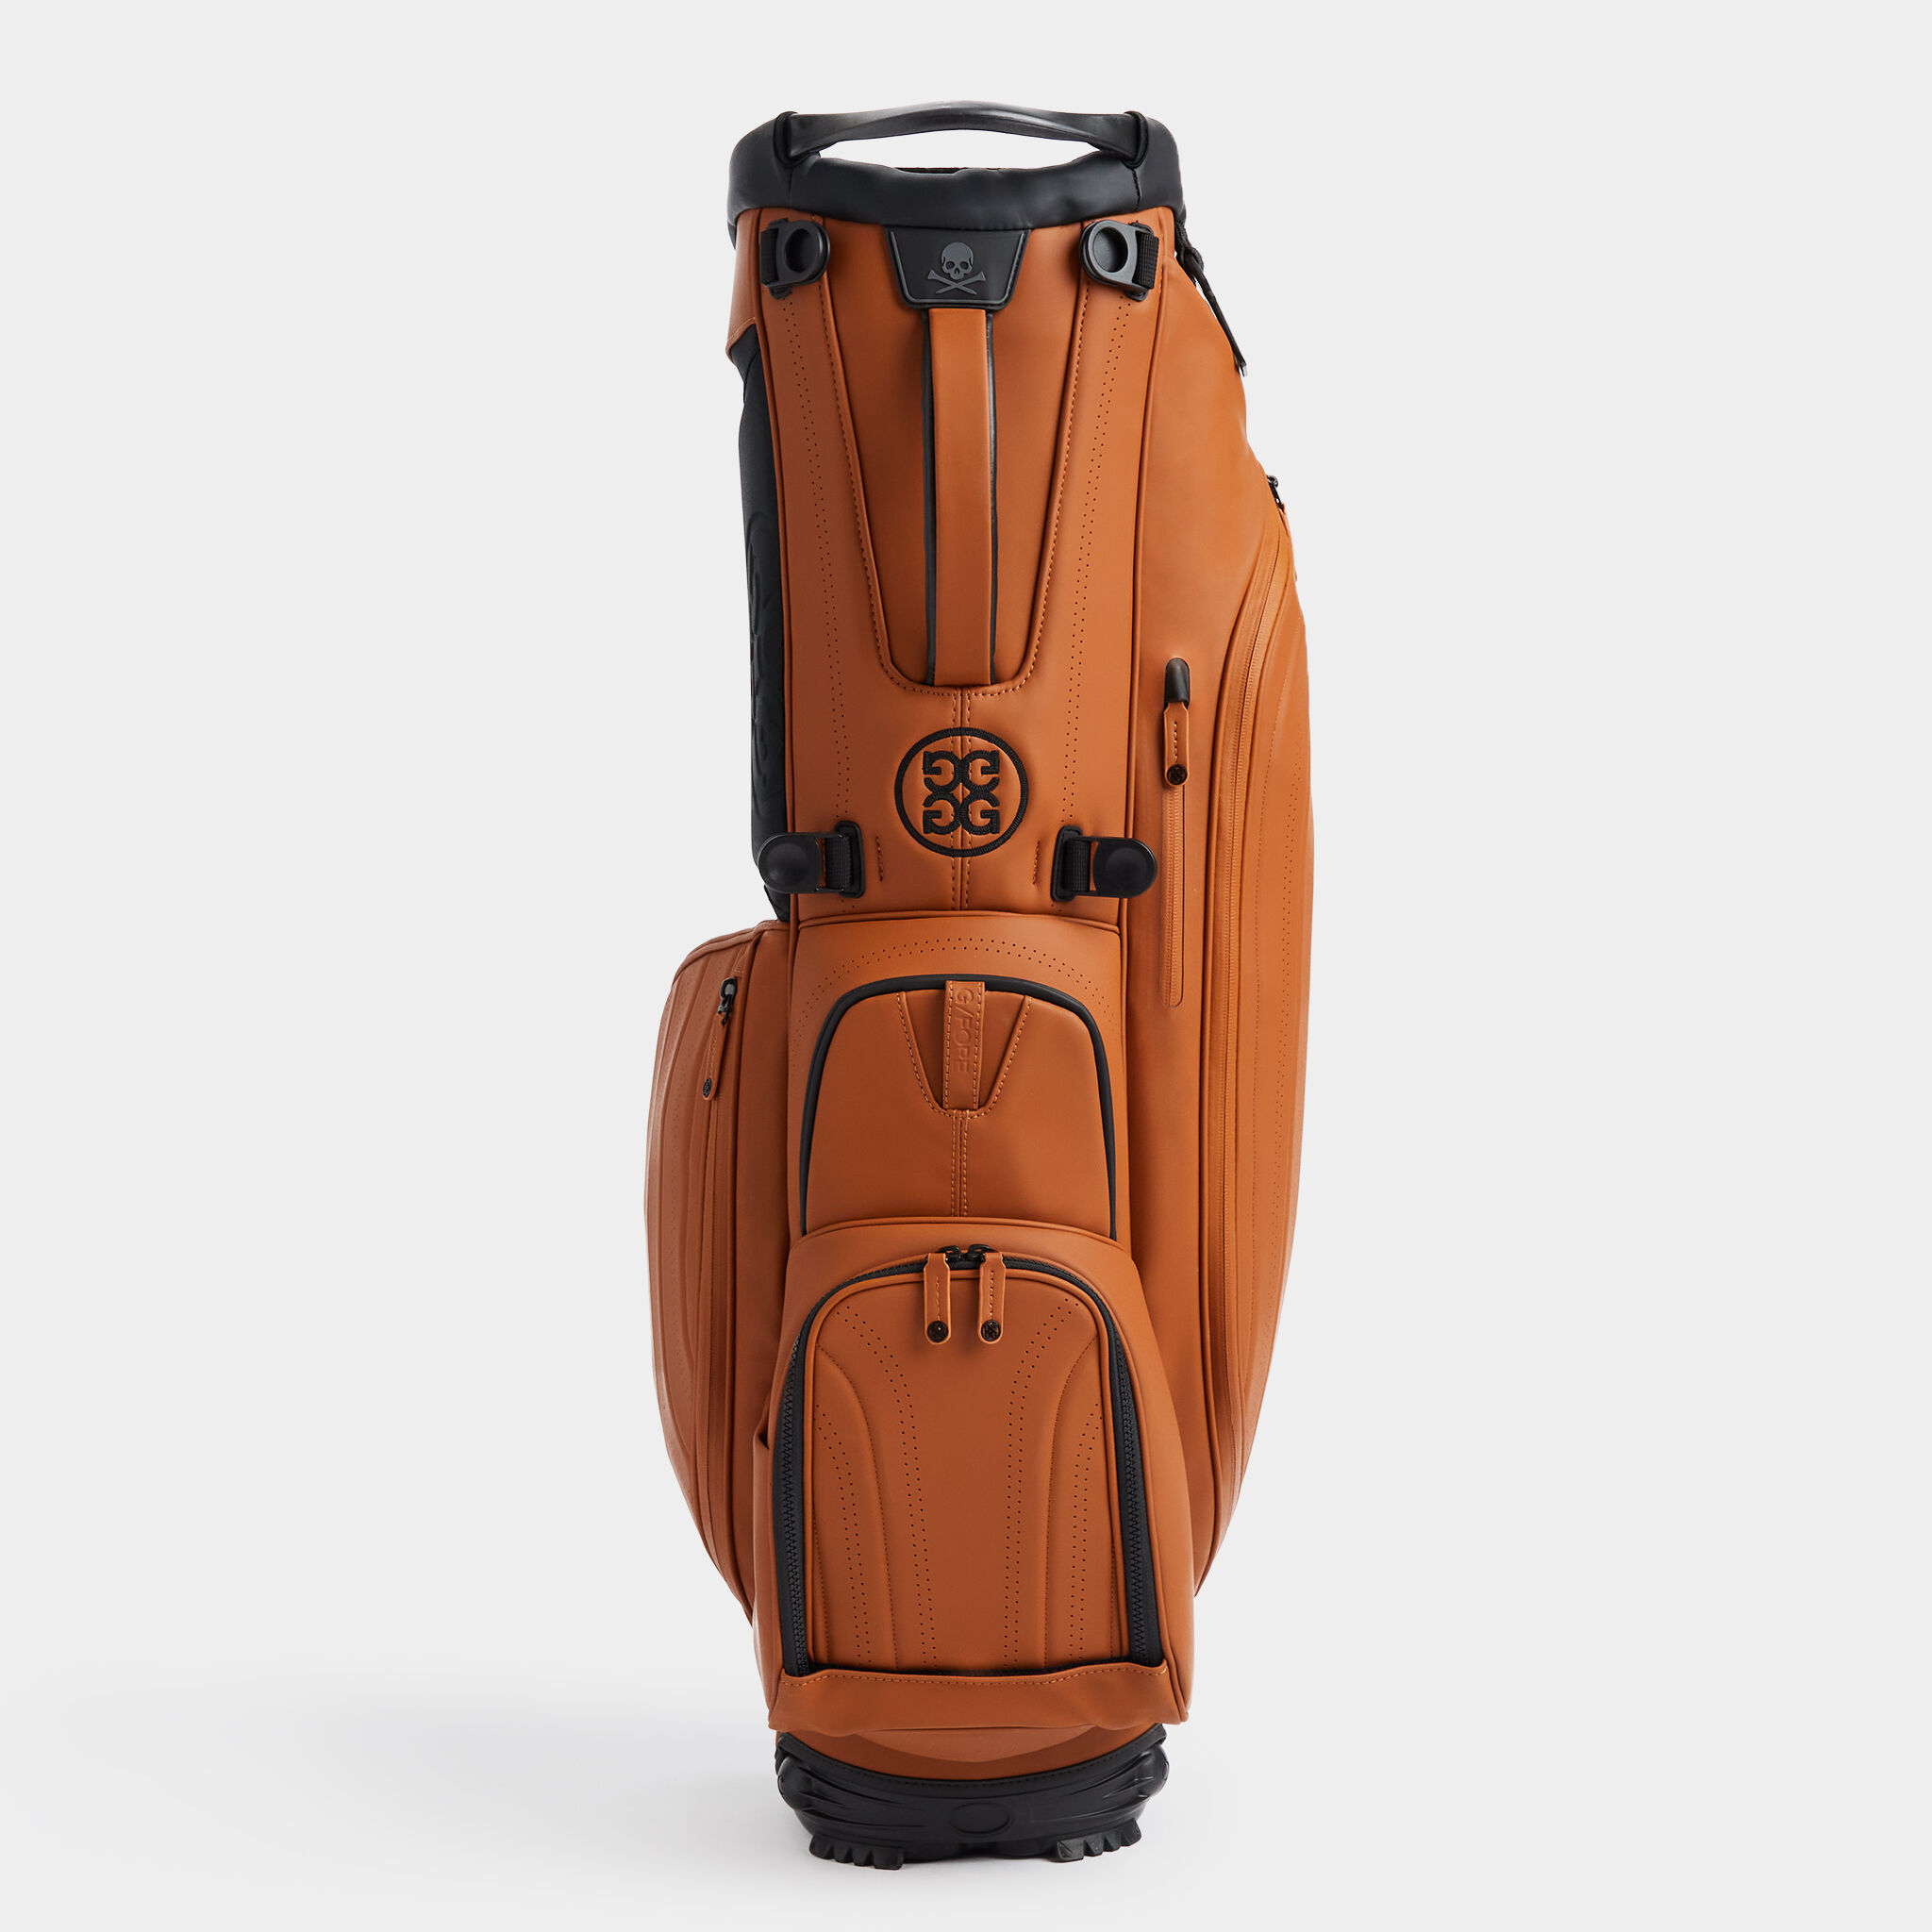 TRANSPORTER TOUR CARRY GOLF BAG | GOLF BAGS FOR MEN AND WOMEN | G/FORE